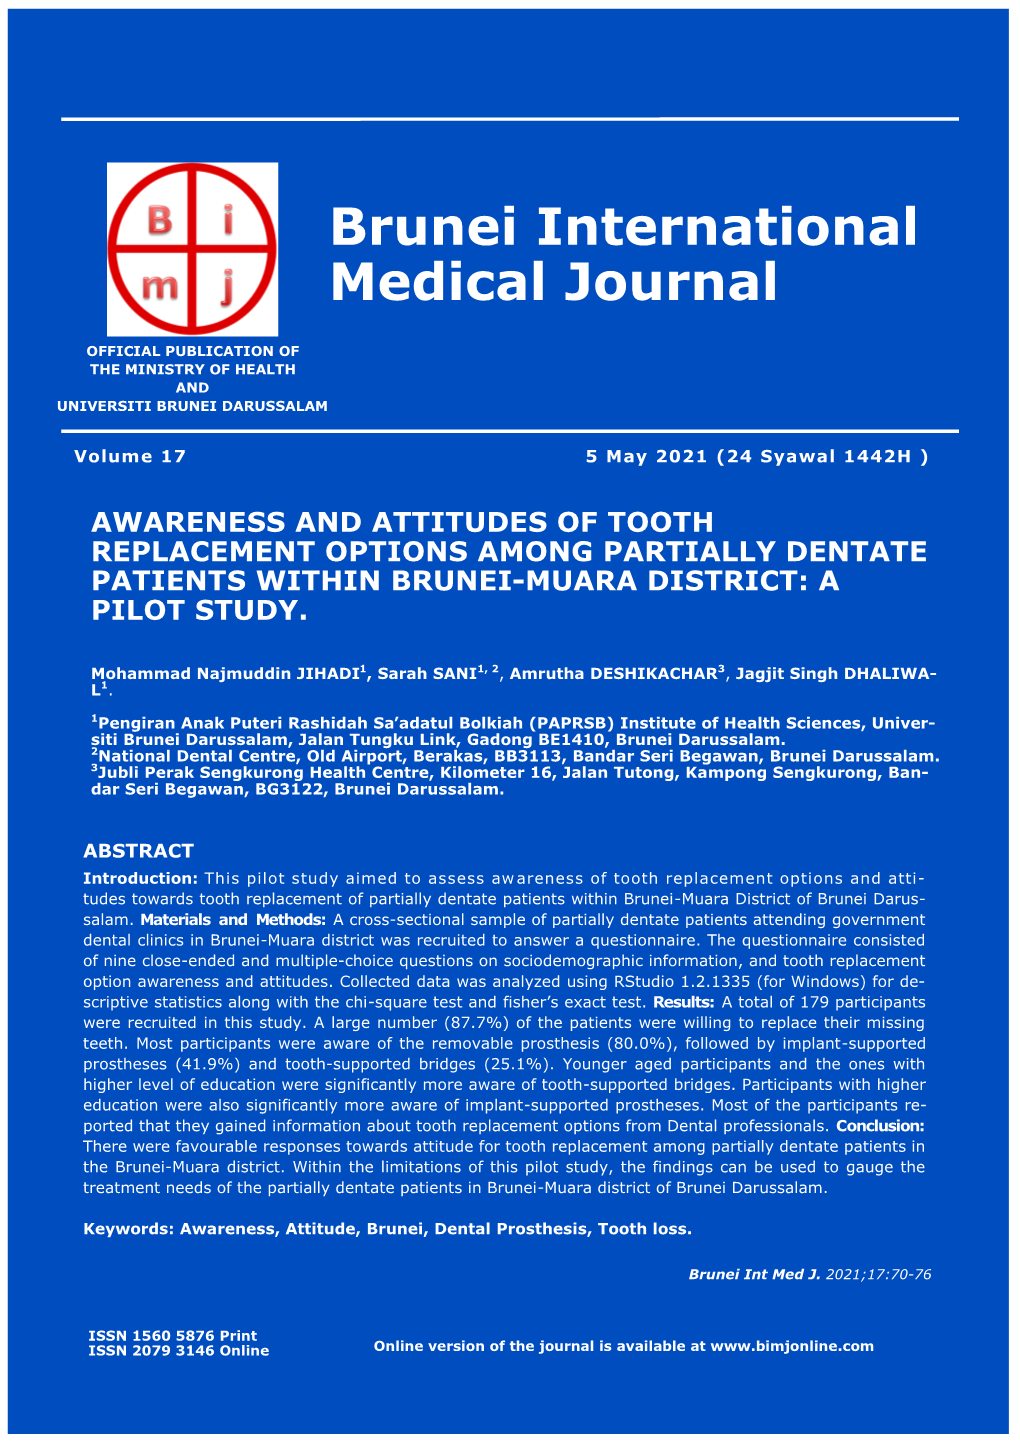 Awareness and Attitudes of Tooth Replacement Options Among Partially Dentate Patients Within Brunei-Muara District: a Pilot Study